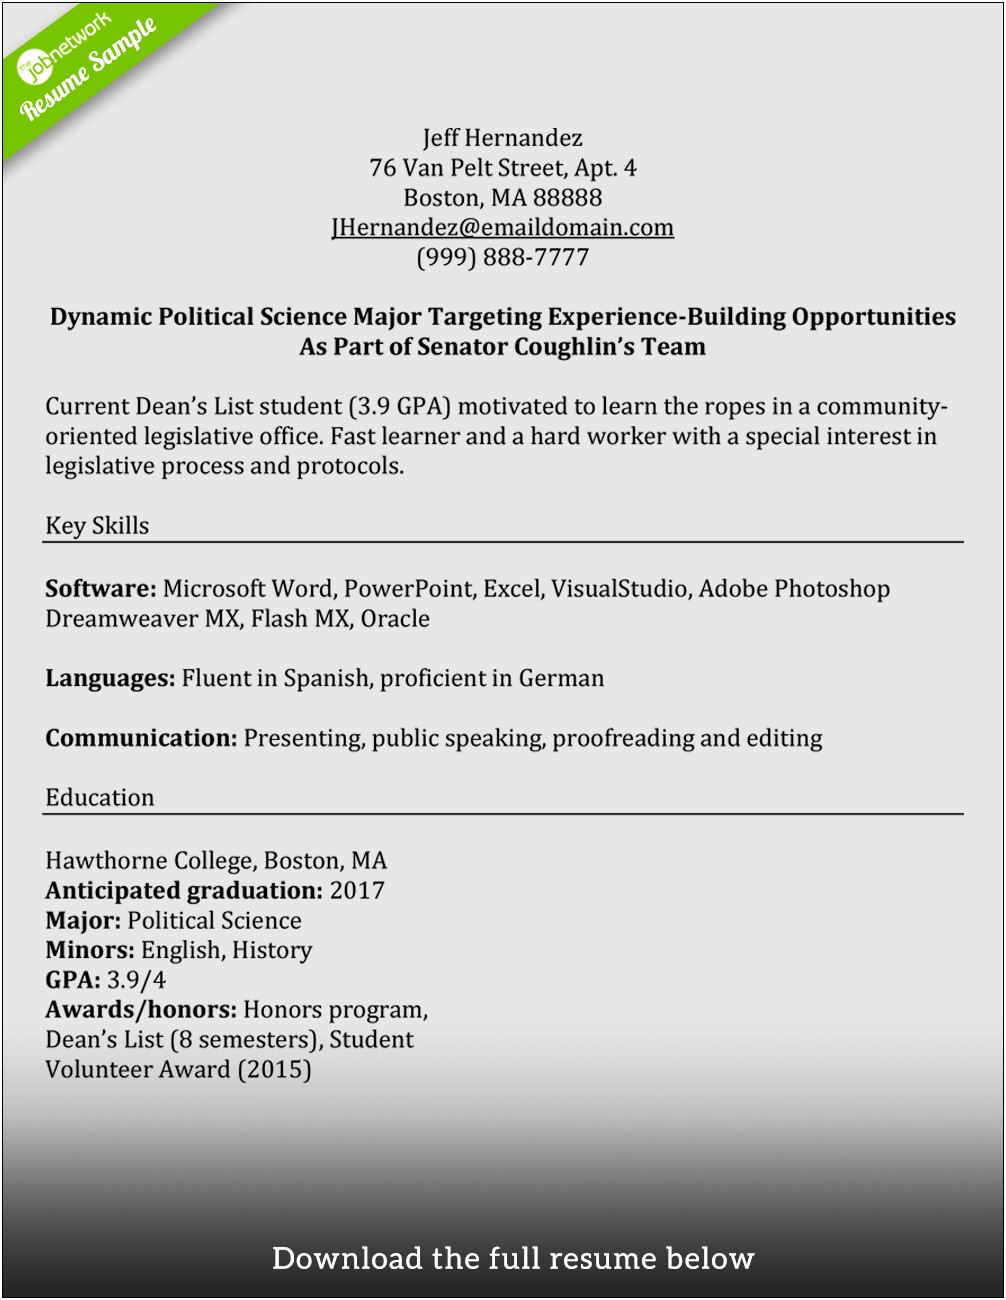 Example Of A Resume Without Work Experience